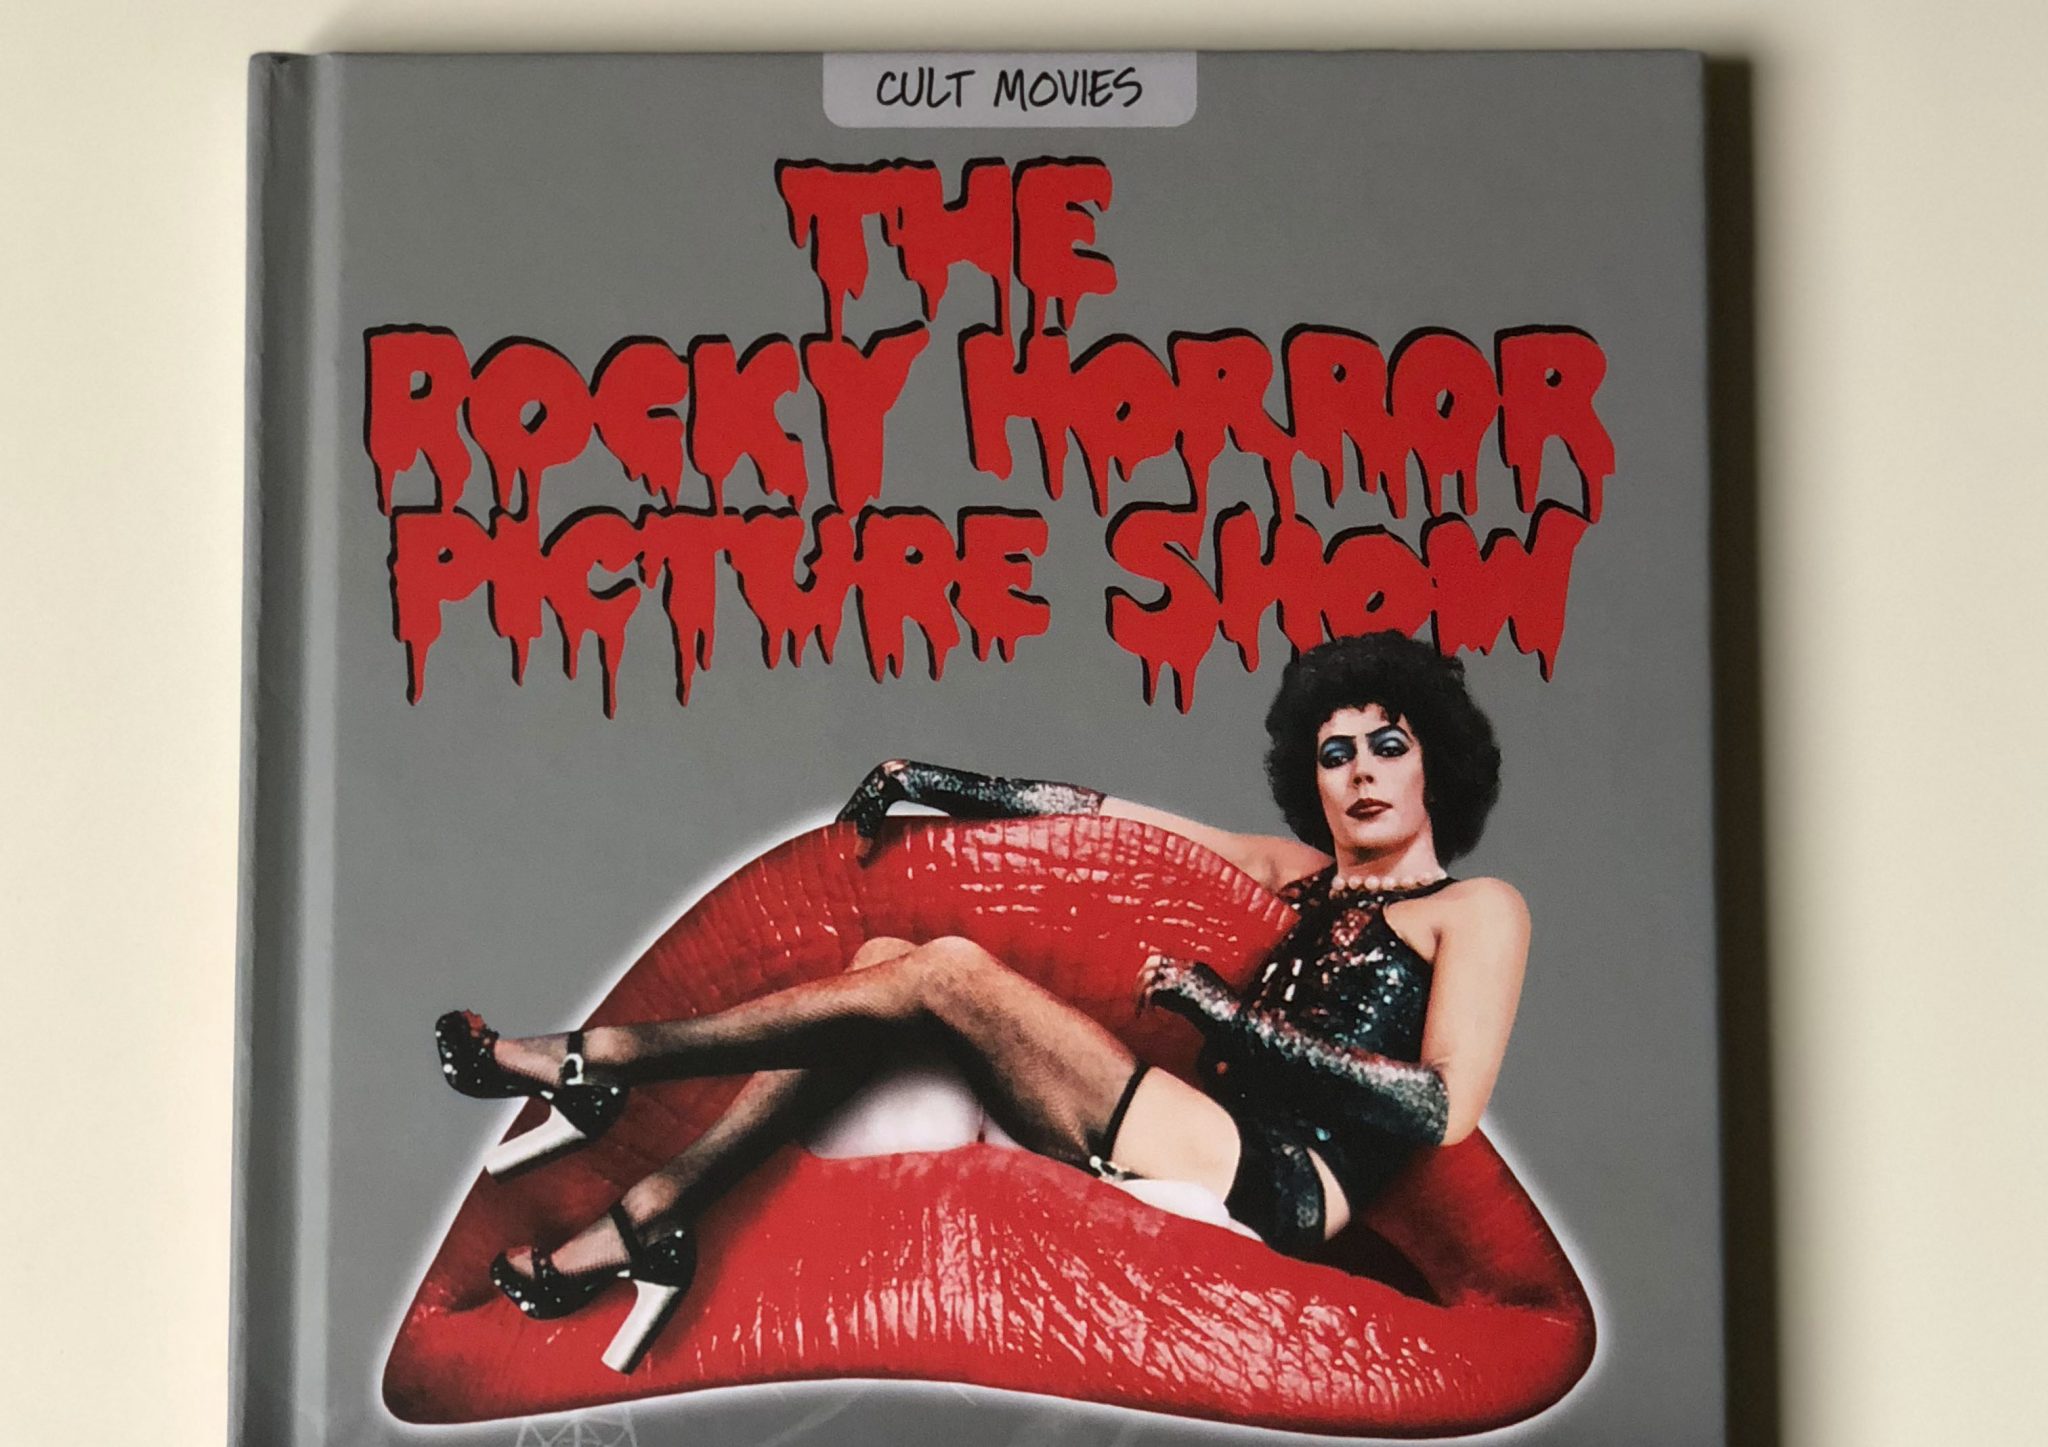 Análisis del DVD ‘The Rocky Horror Picture Show’ Collector’s Cut